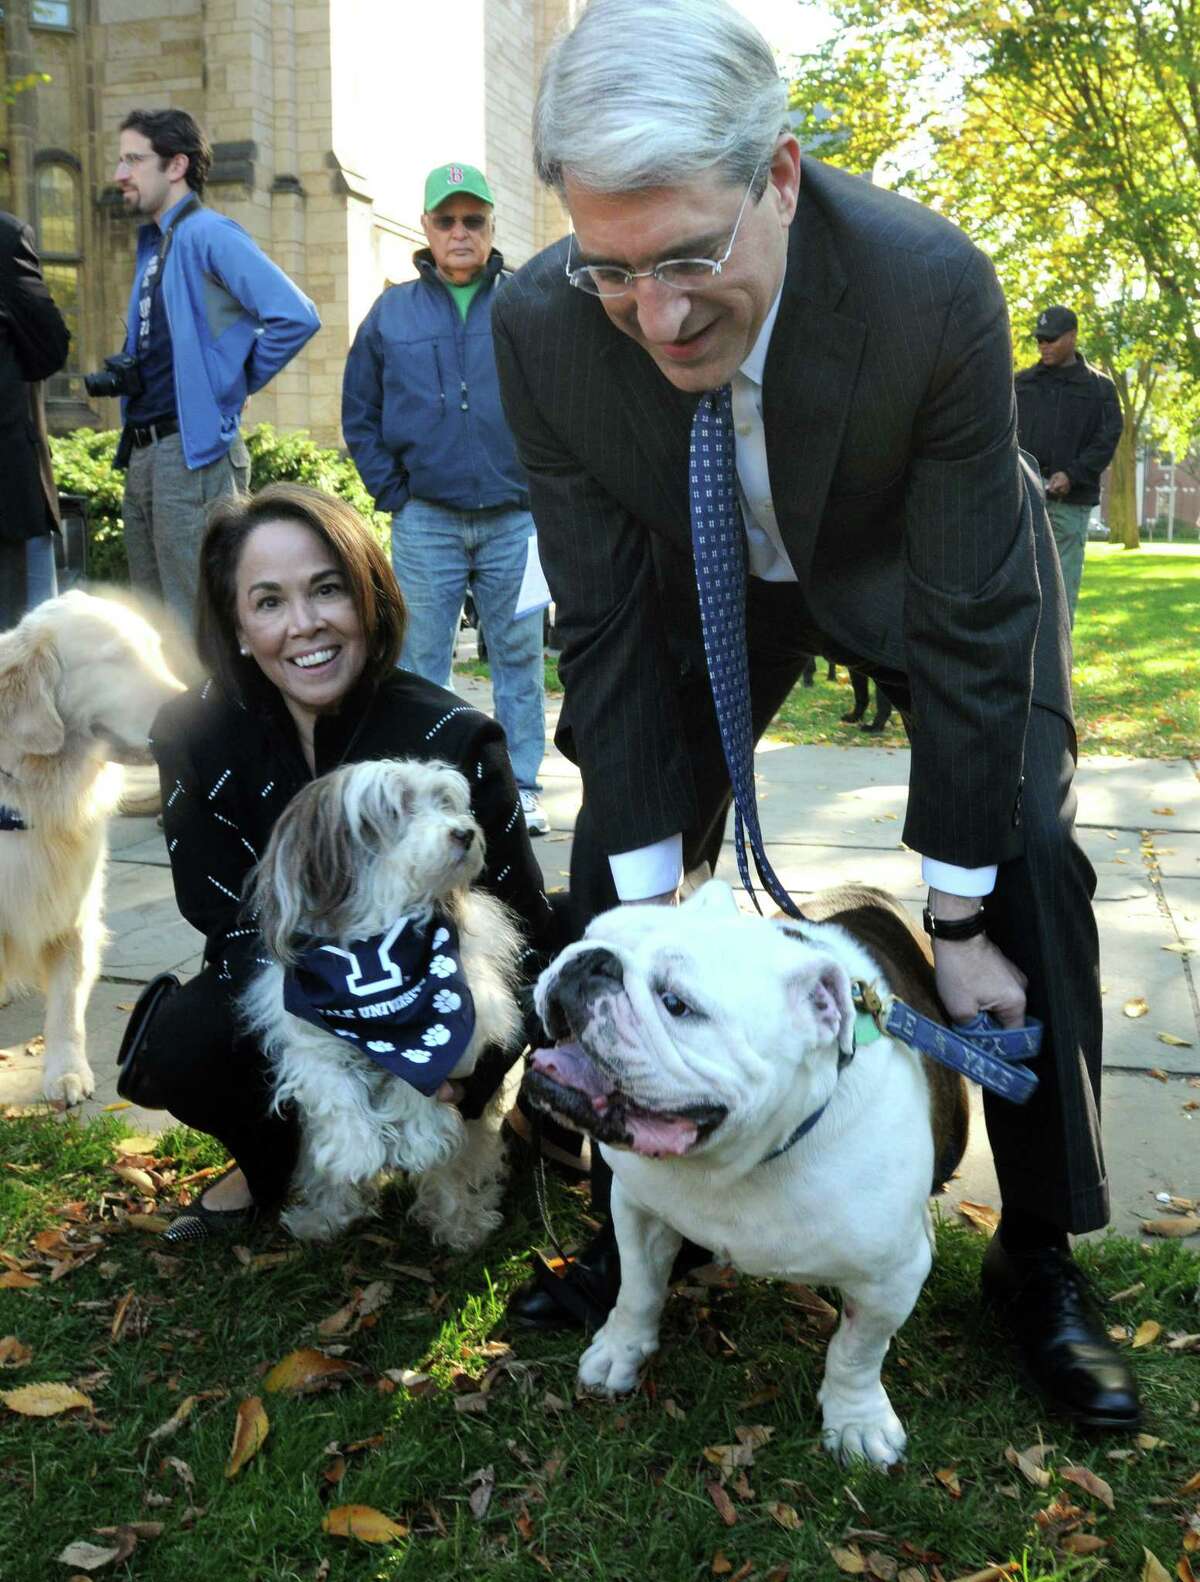 (Mara Lavitt ?‘ New Haven Register) October 12, 2013 New Haven Yale University held a campus-wide open house in celebration of Peter Salovey's inauguration on Sunday as the 23rd president of Yale. The celebration started with a Canine Kickoff, inviting all campus dogs to attend.A procession around Cross Campus included Salovey, his wife Marta Moret, and the First Dog, Portia here with Handsome Dan XVII.